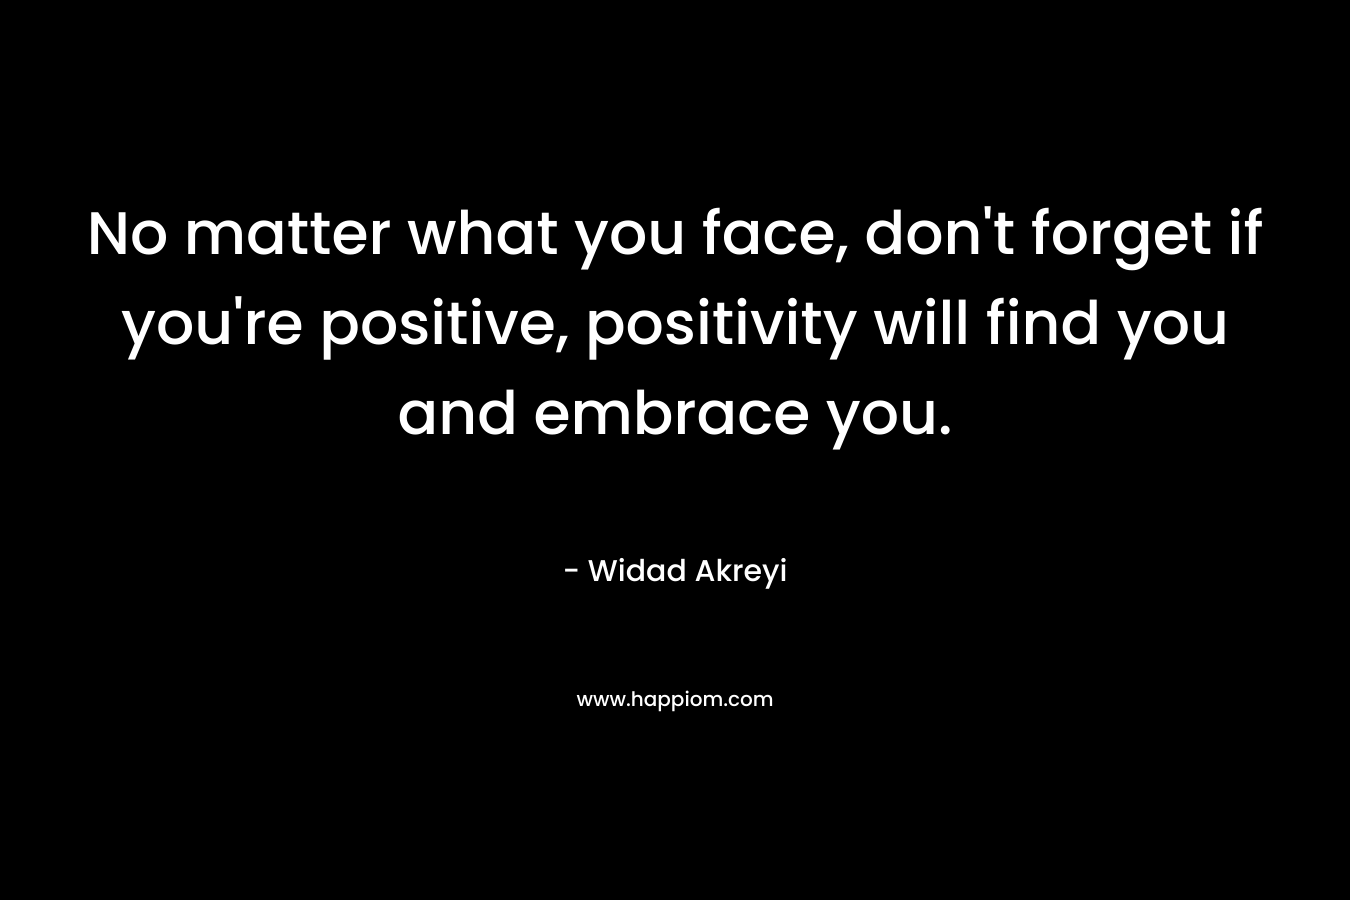 No matter what you face, don't forget if you're positive, positivity will find you and embrace you.